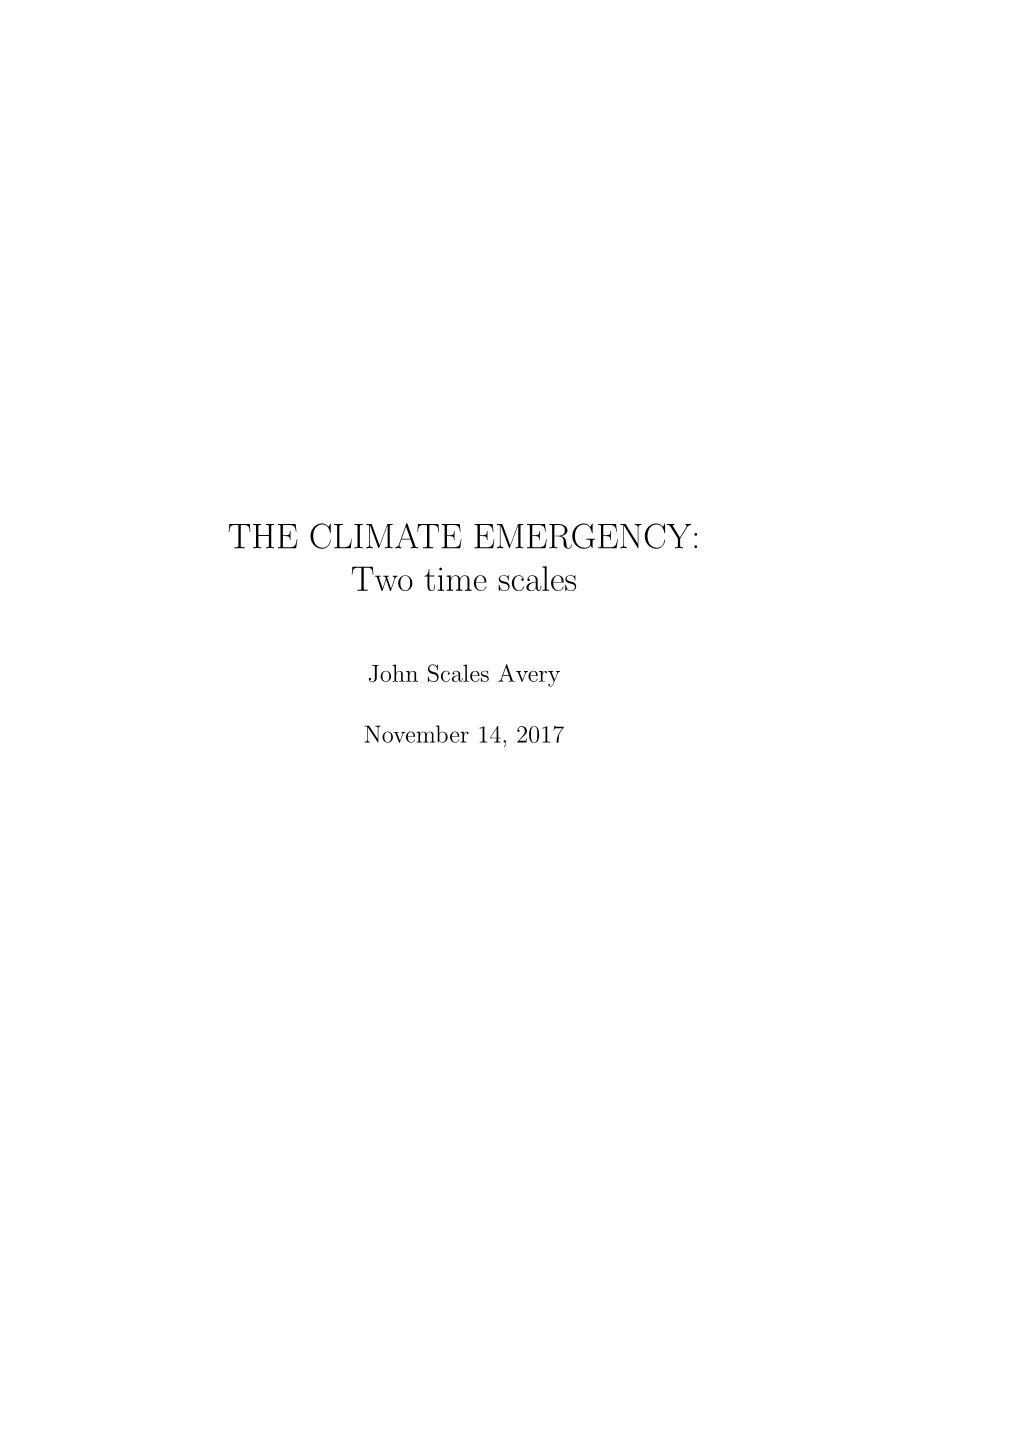 THE CLIMATE EMERGENCY: Two Time Scales